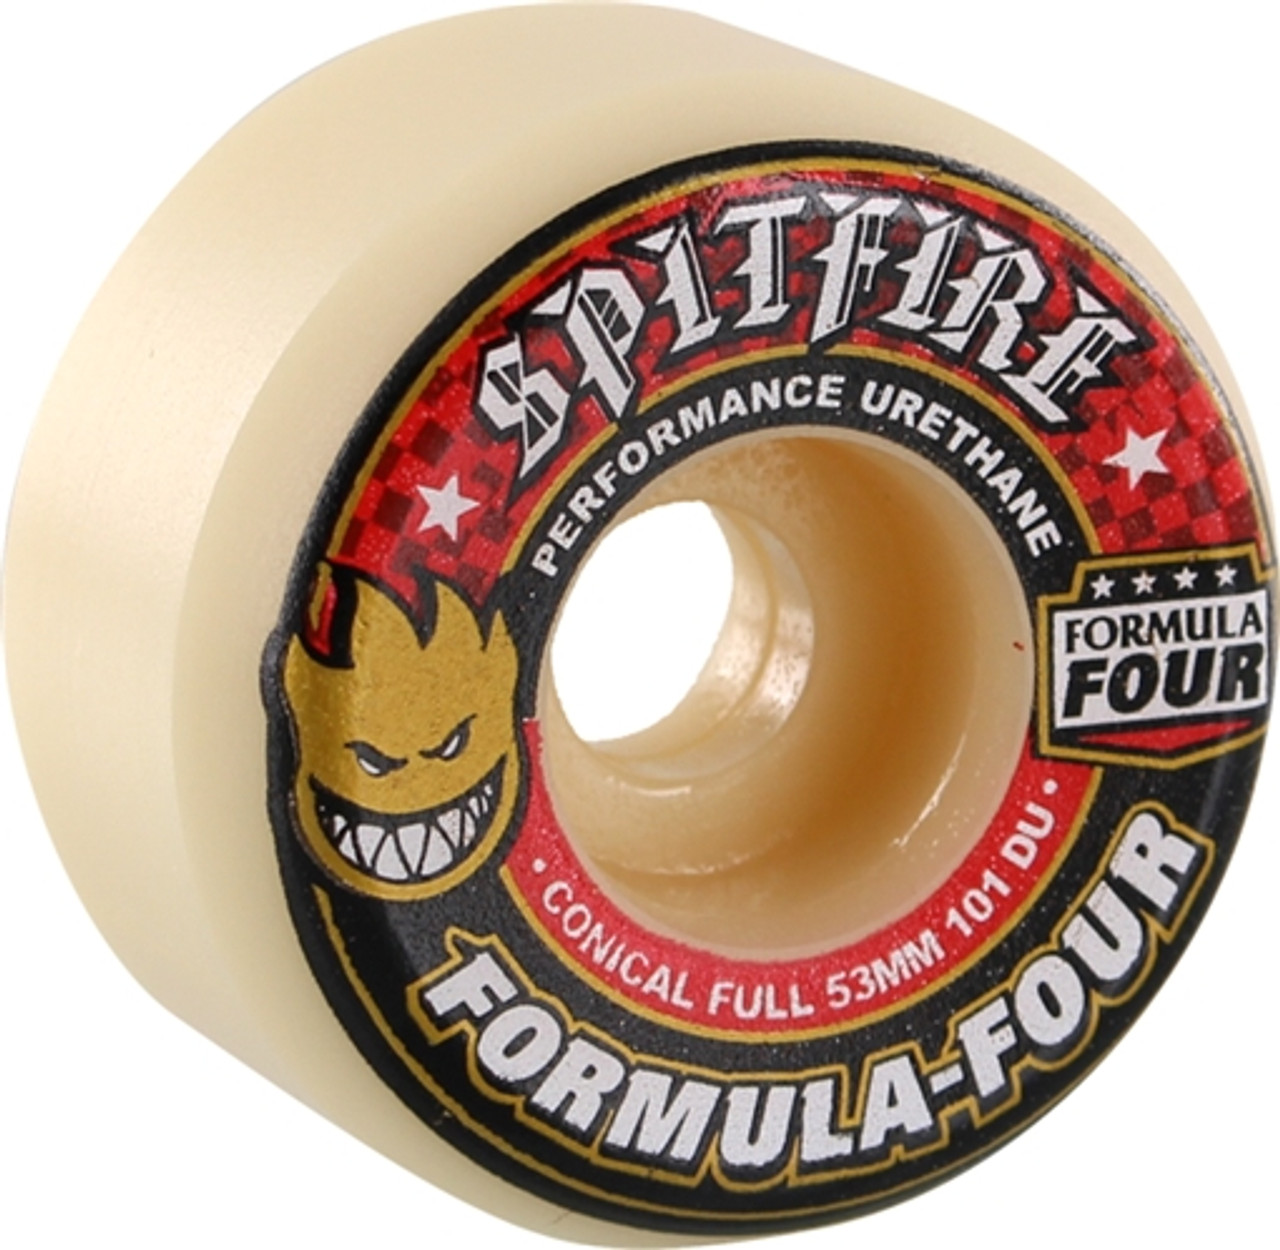 SPITFIRE FORMULA 4 101a CONICAL FULL 53mm WHT W/RED Wheels Set